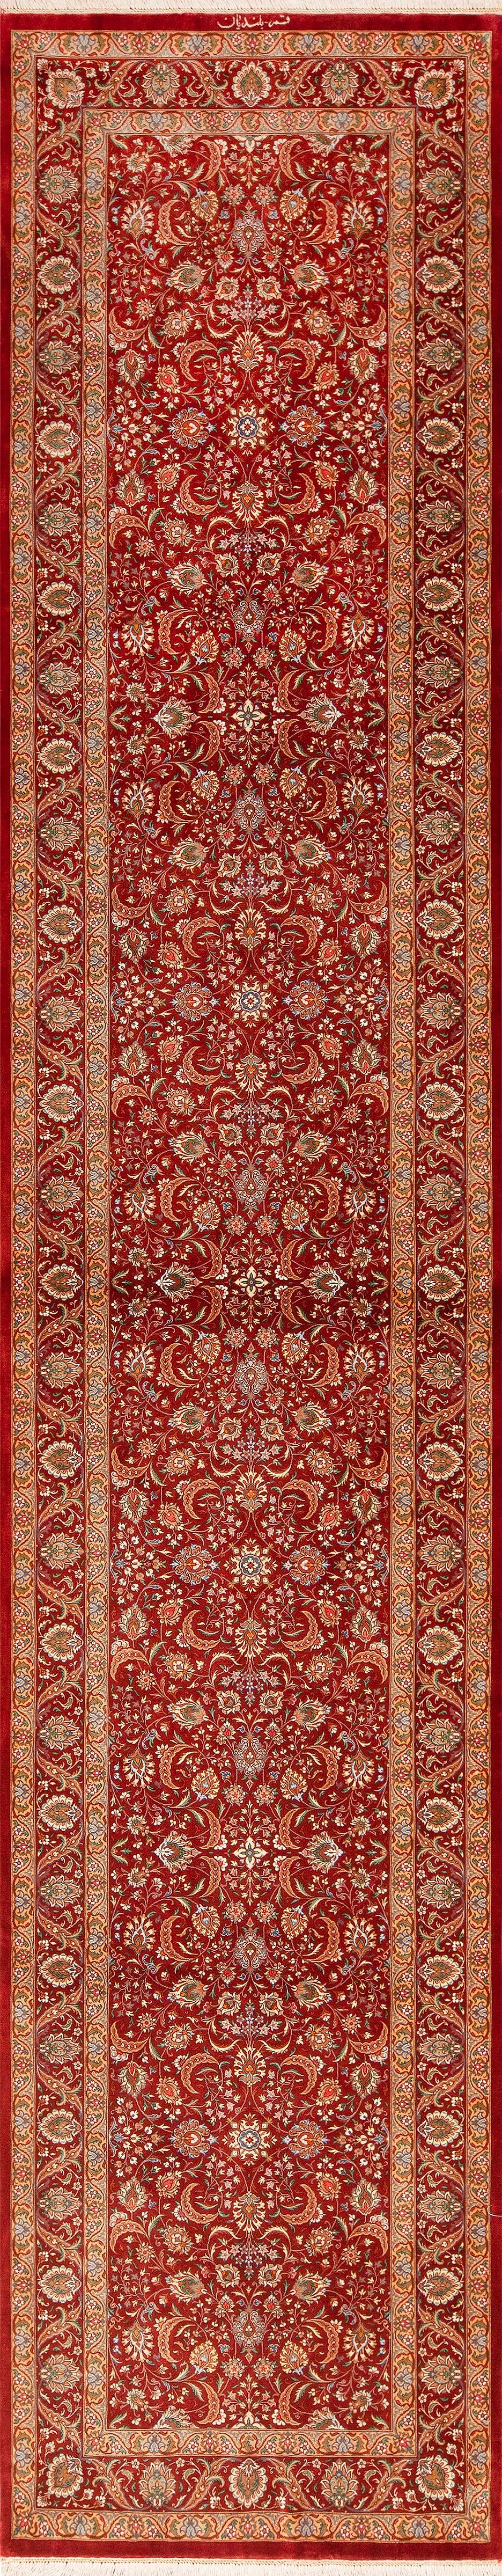 Hand-Knotted Red Fine Floral Luxurious Vintage Persian Qum Silk Runner Rug 2'9